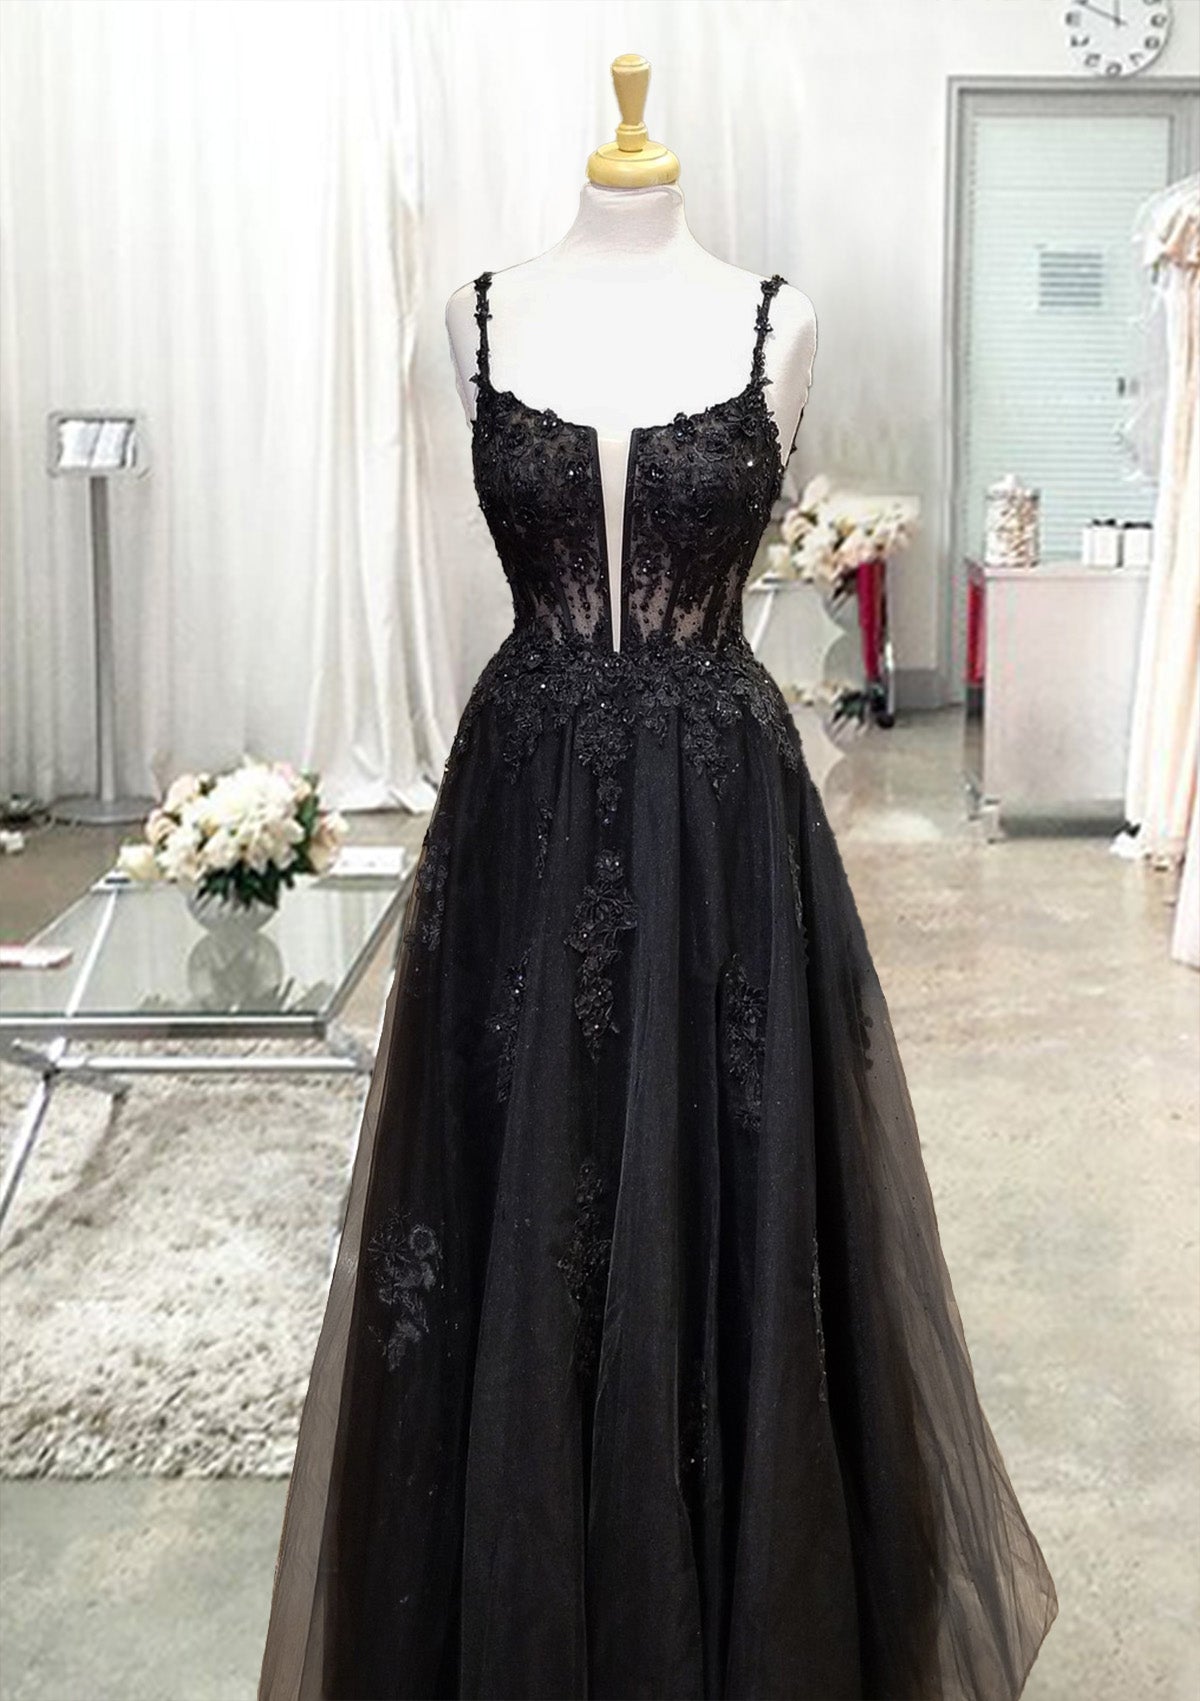 Black Prom Dresses, A-line Square Neckline Spaghetti Straps Long/Floor-Length Tulle Prom Dress With Glitter Beading Appliqued